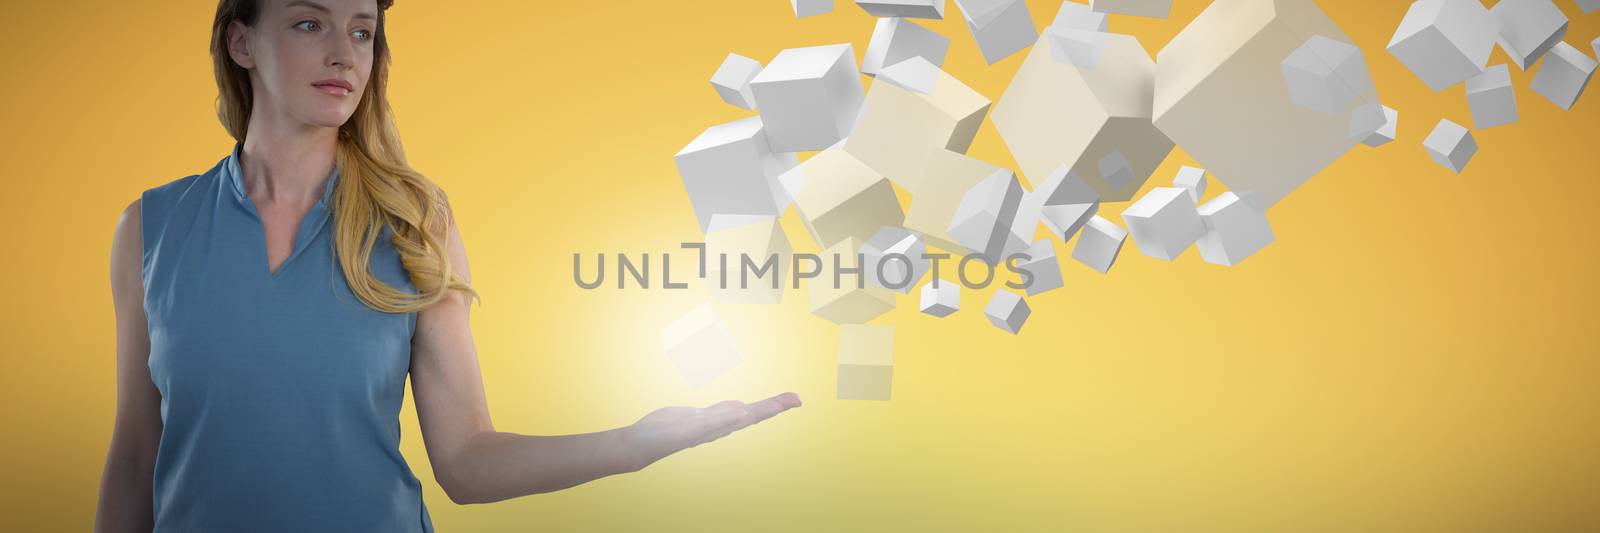 Businesswoman presenting object against abstract yellow background